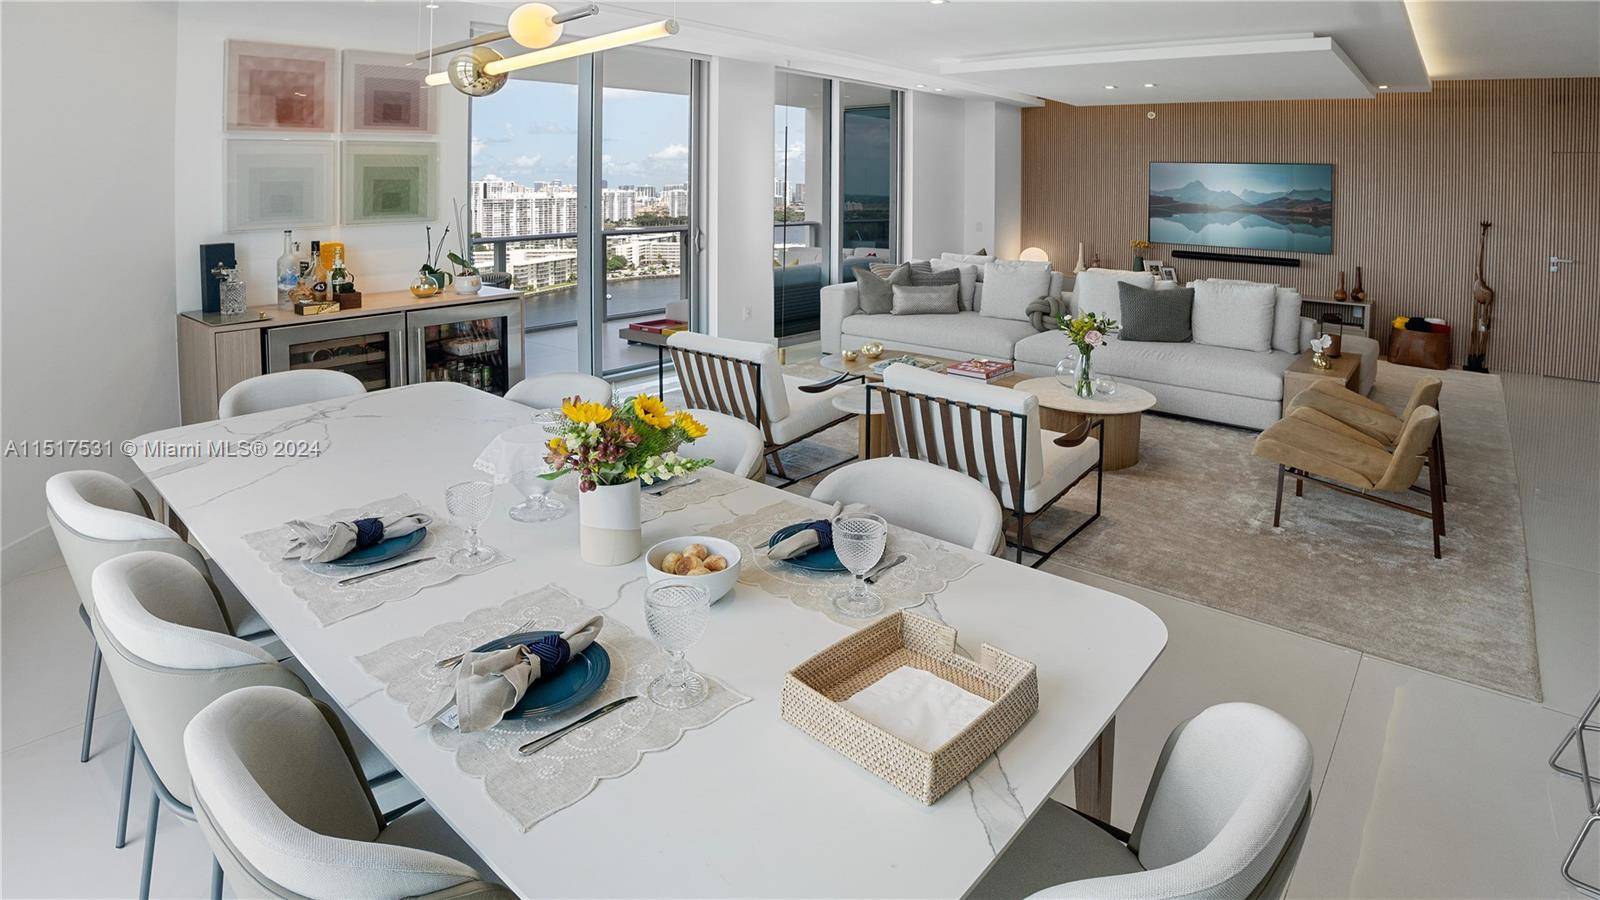 This immaculate unit at Marina Palms has 3 Bedrooms, 2.